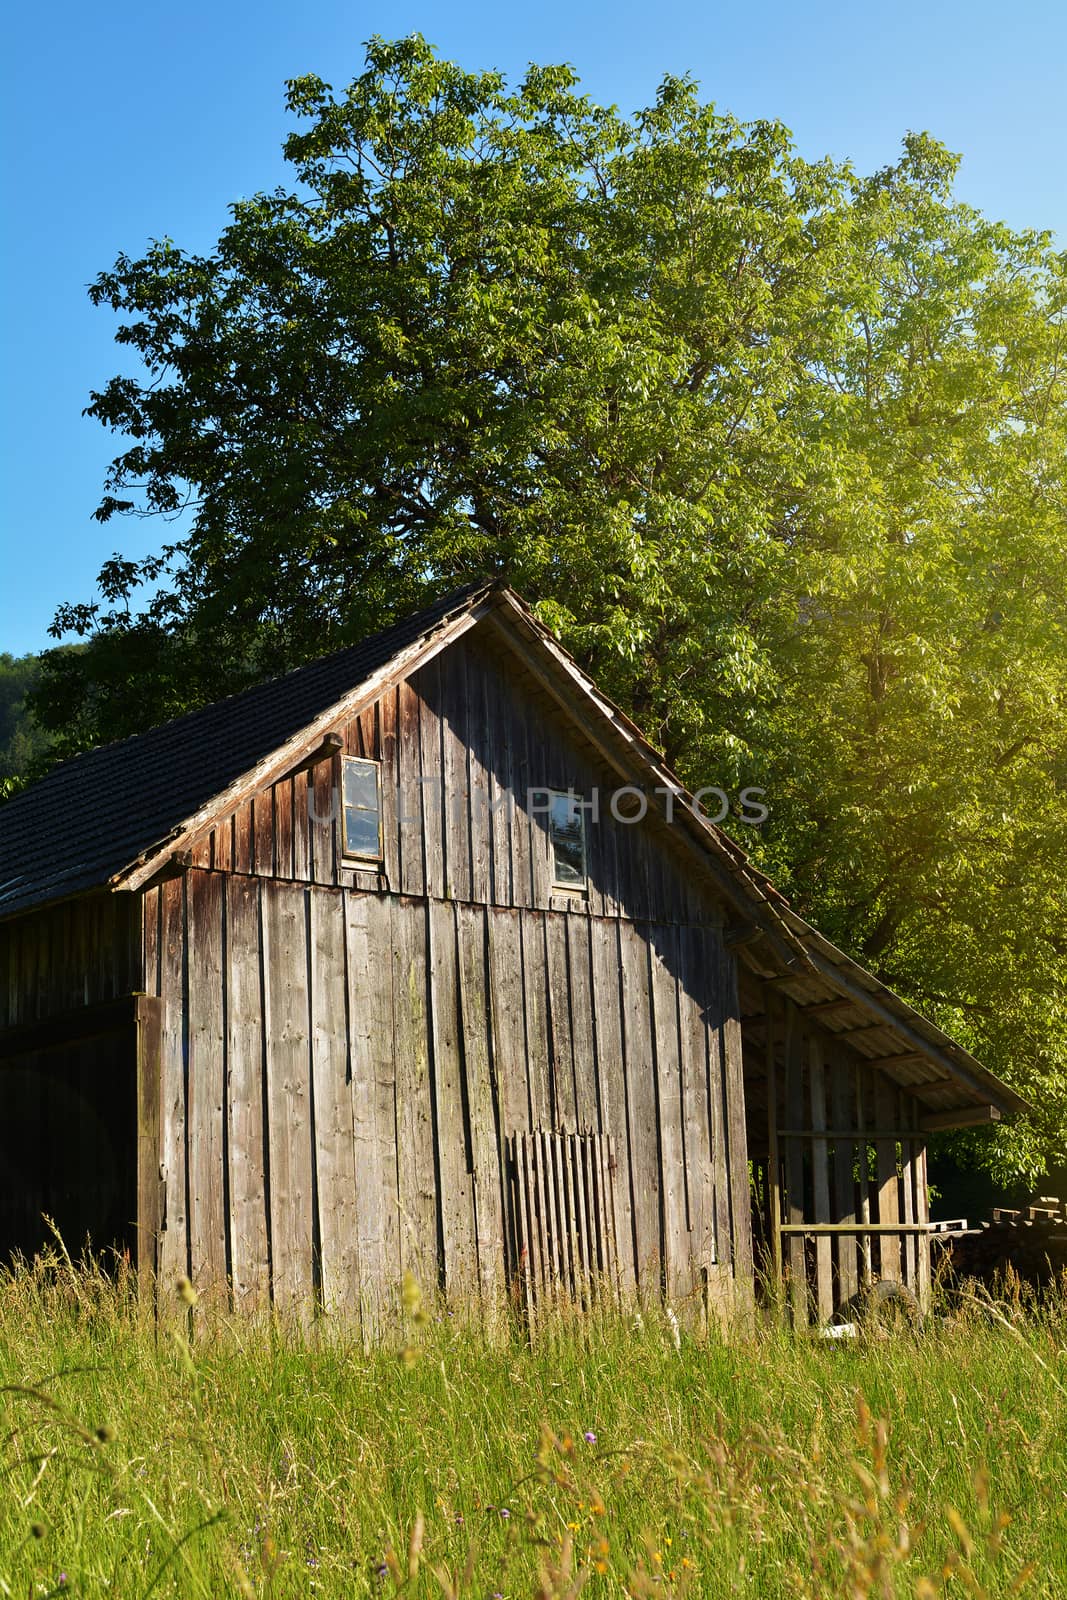 Old wooden house by photosampler